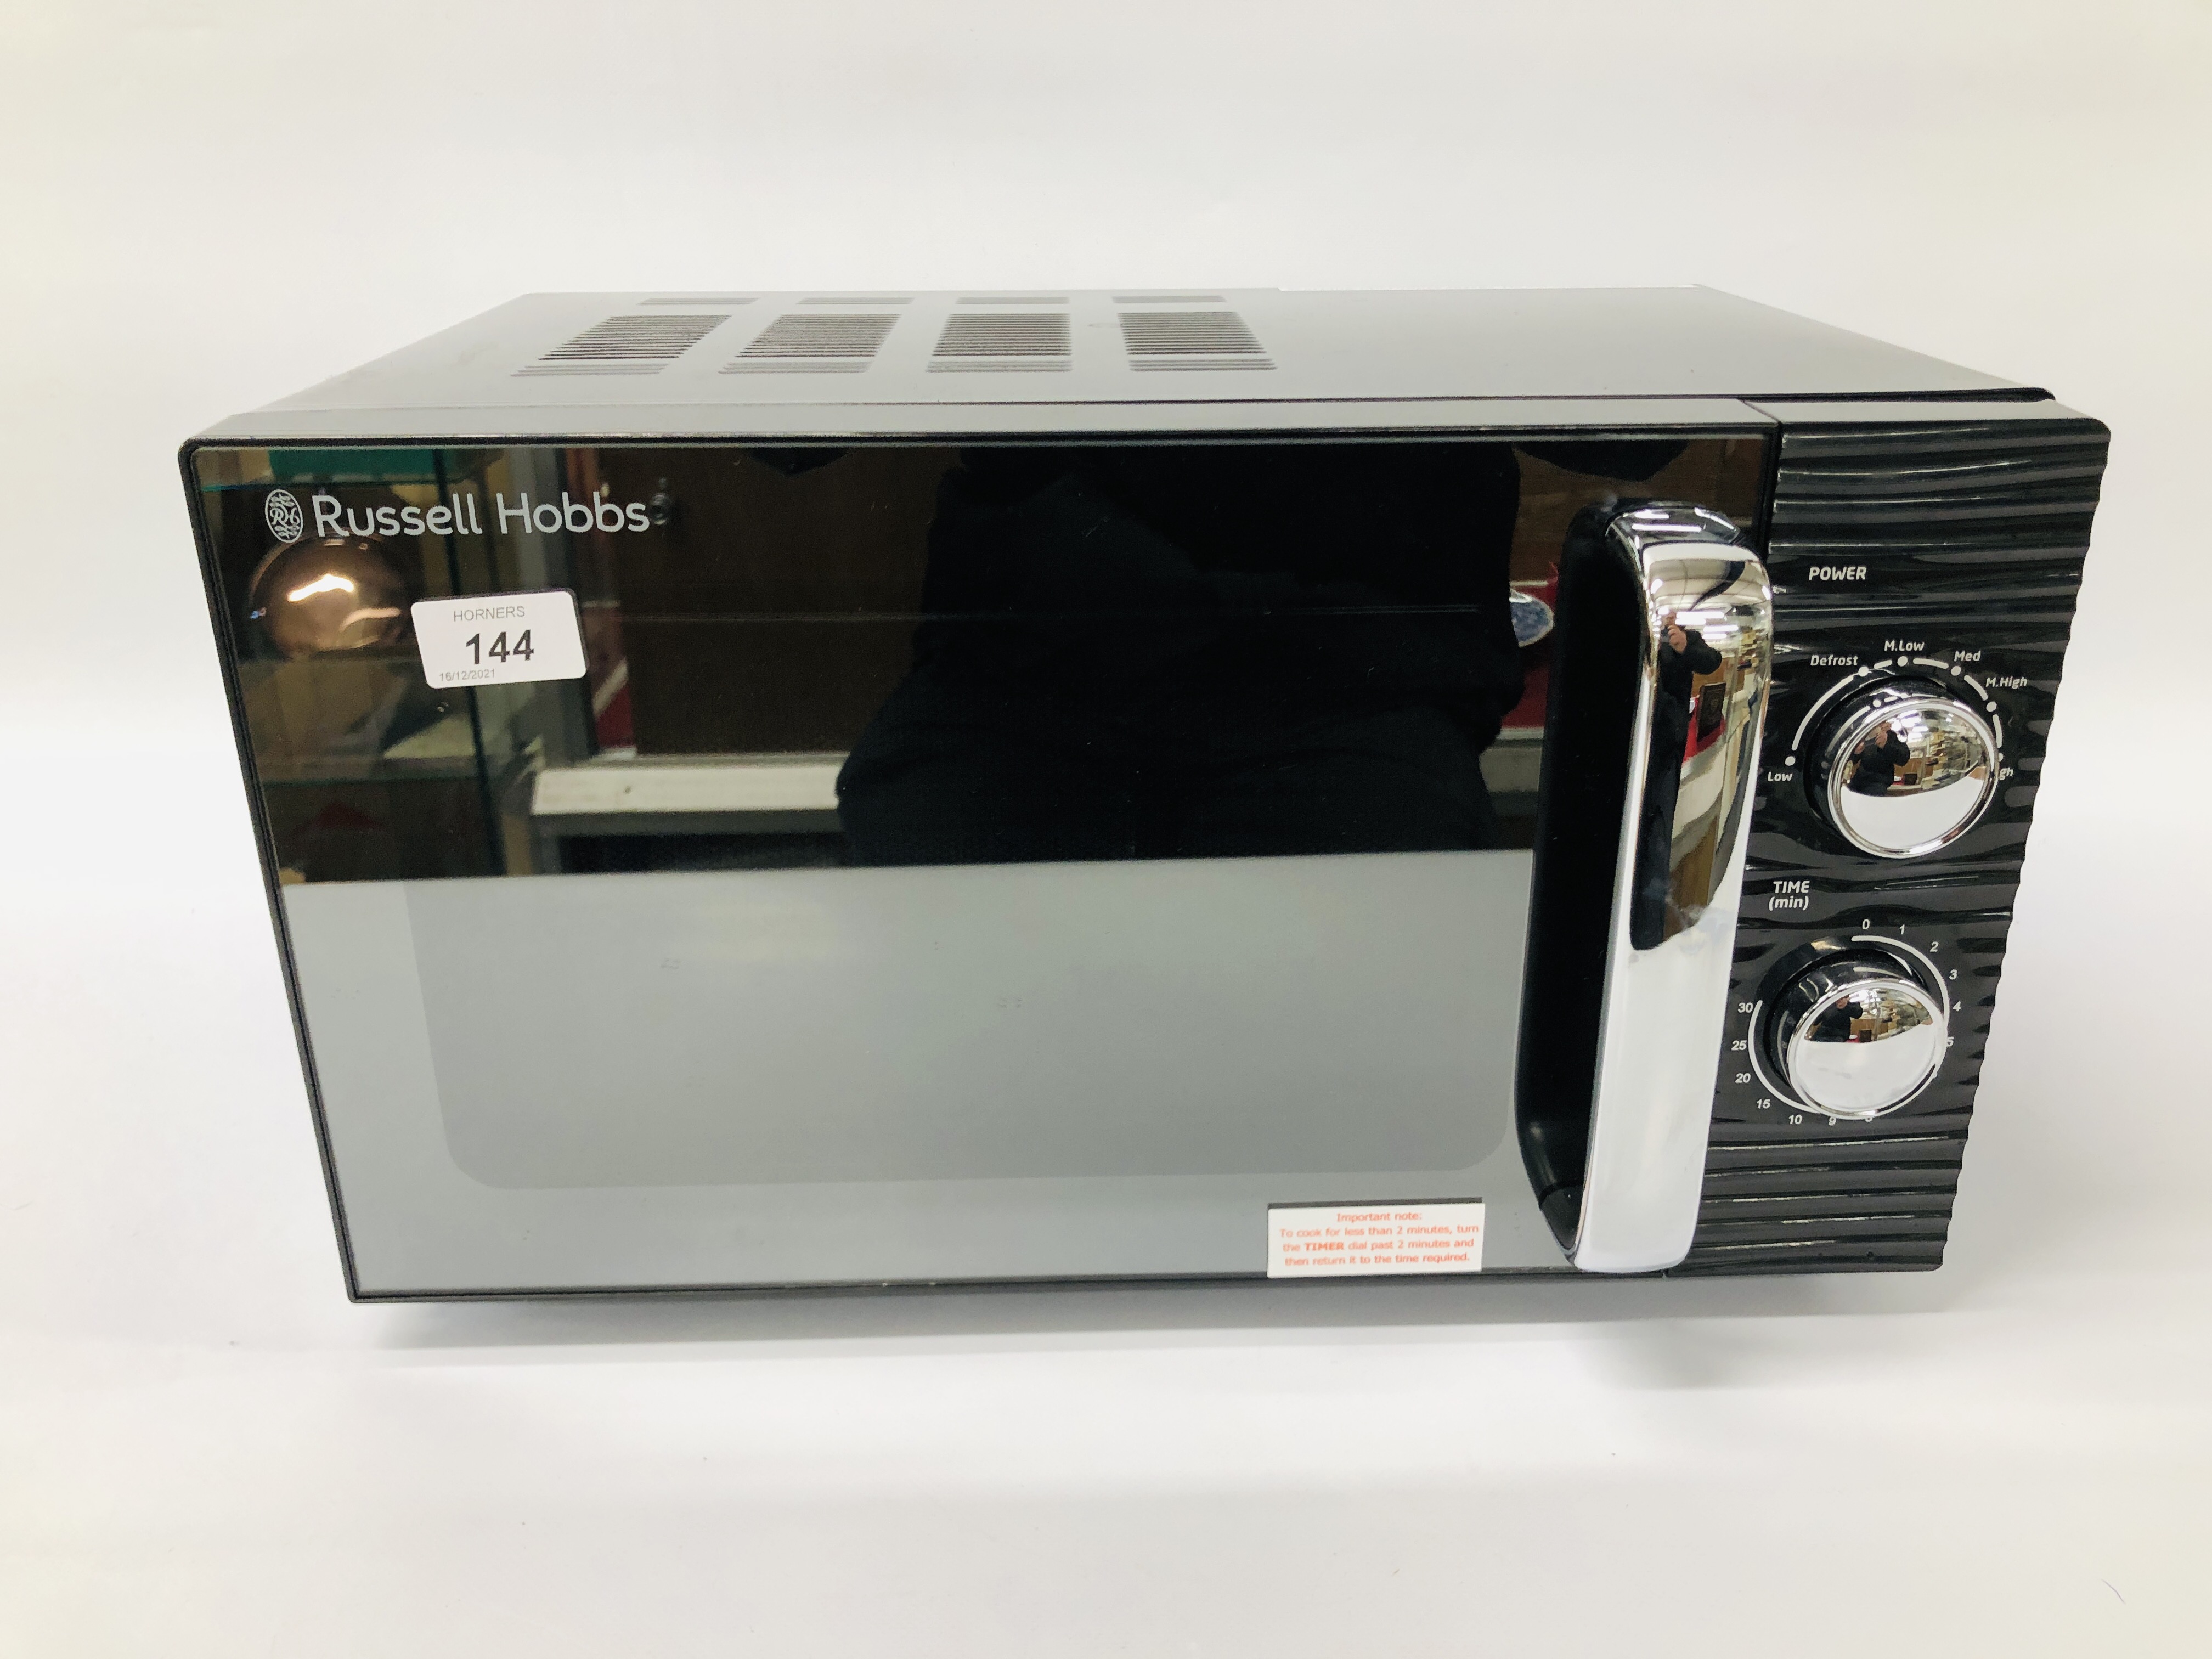 A RUSSELL HOBBS COMPACT MICROWAVE OVEN - SOLD AS SEEN - Image 2 of 6